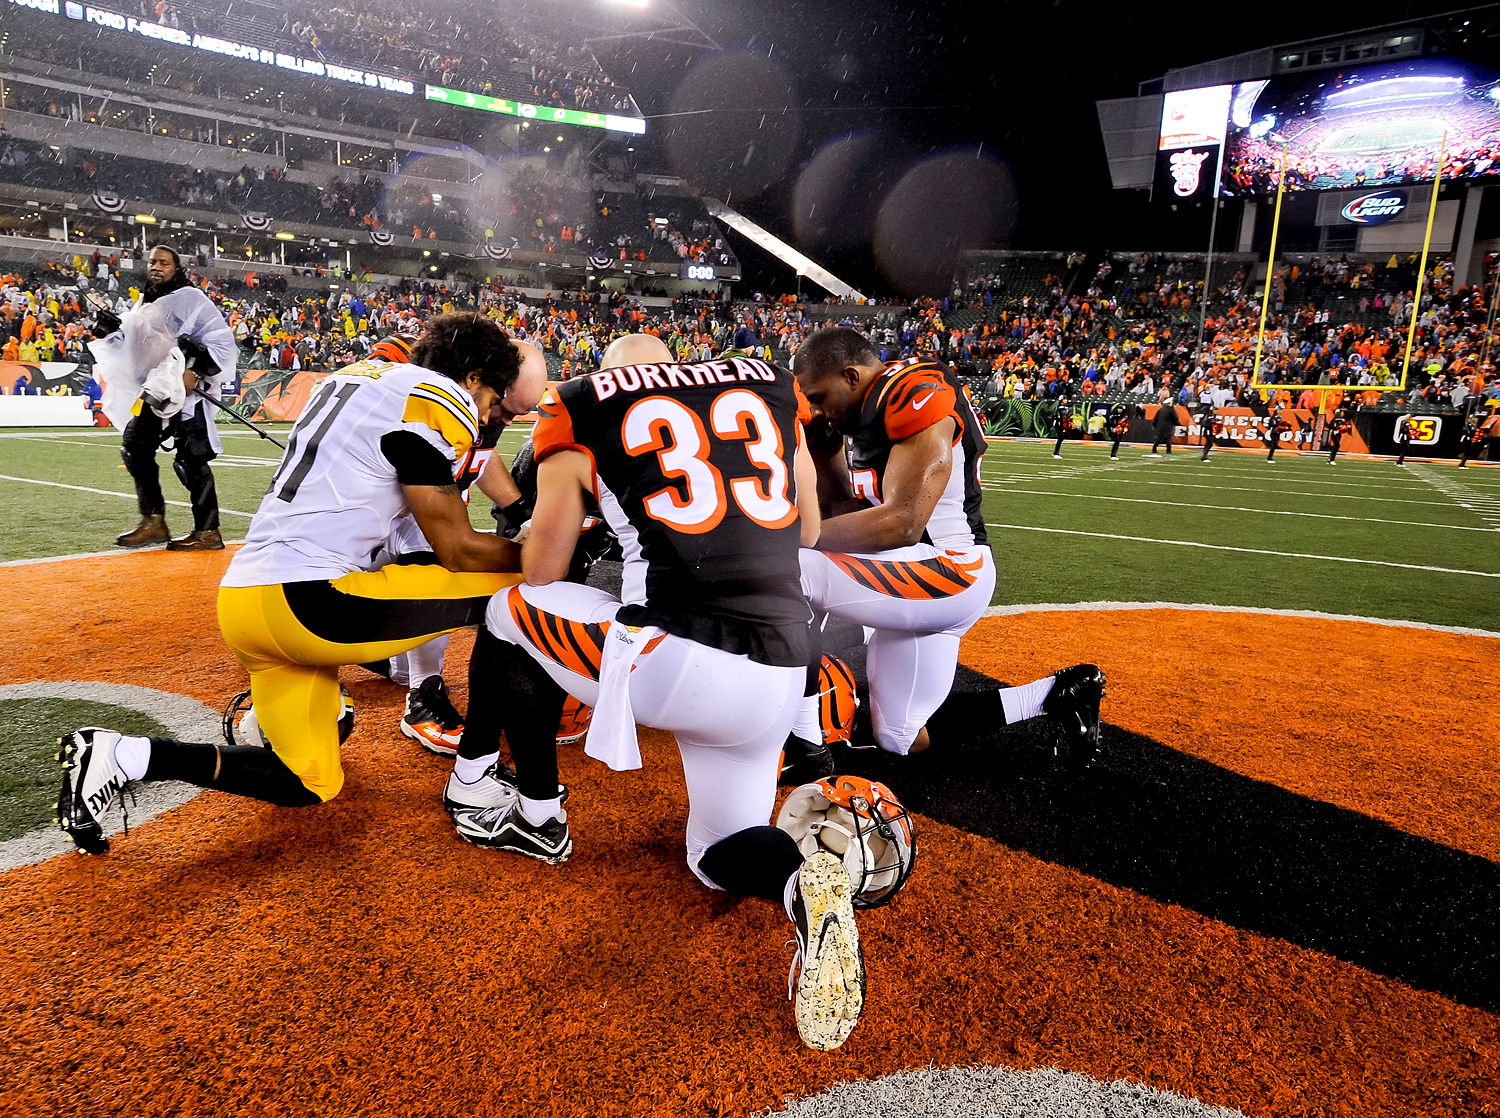 Moment of prayer goes viral after ugly Steelers-Bengals contest